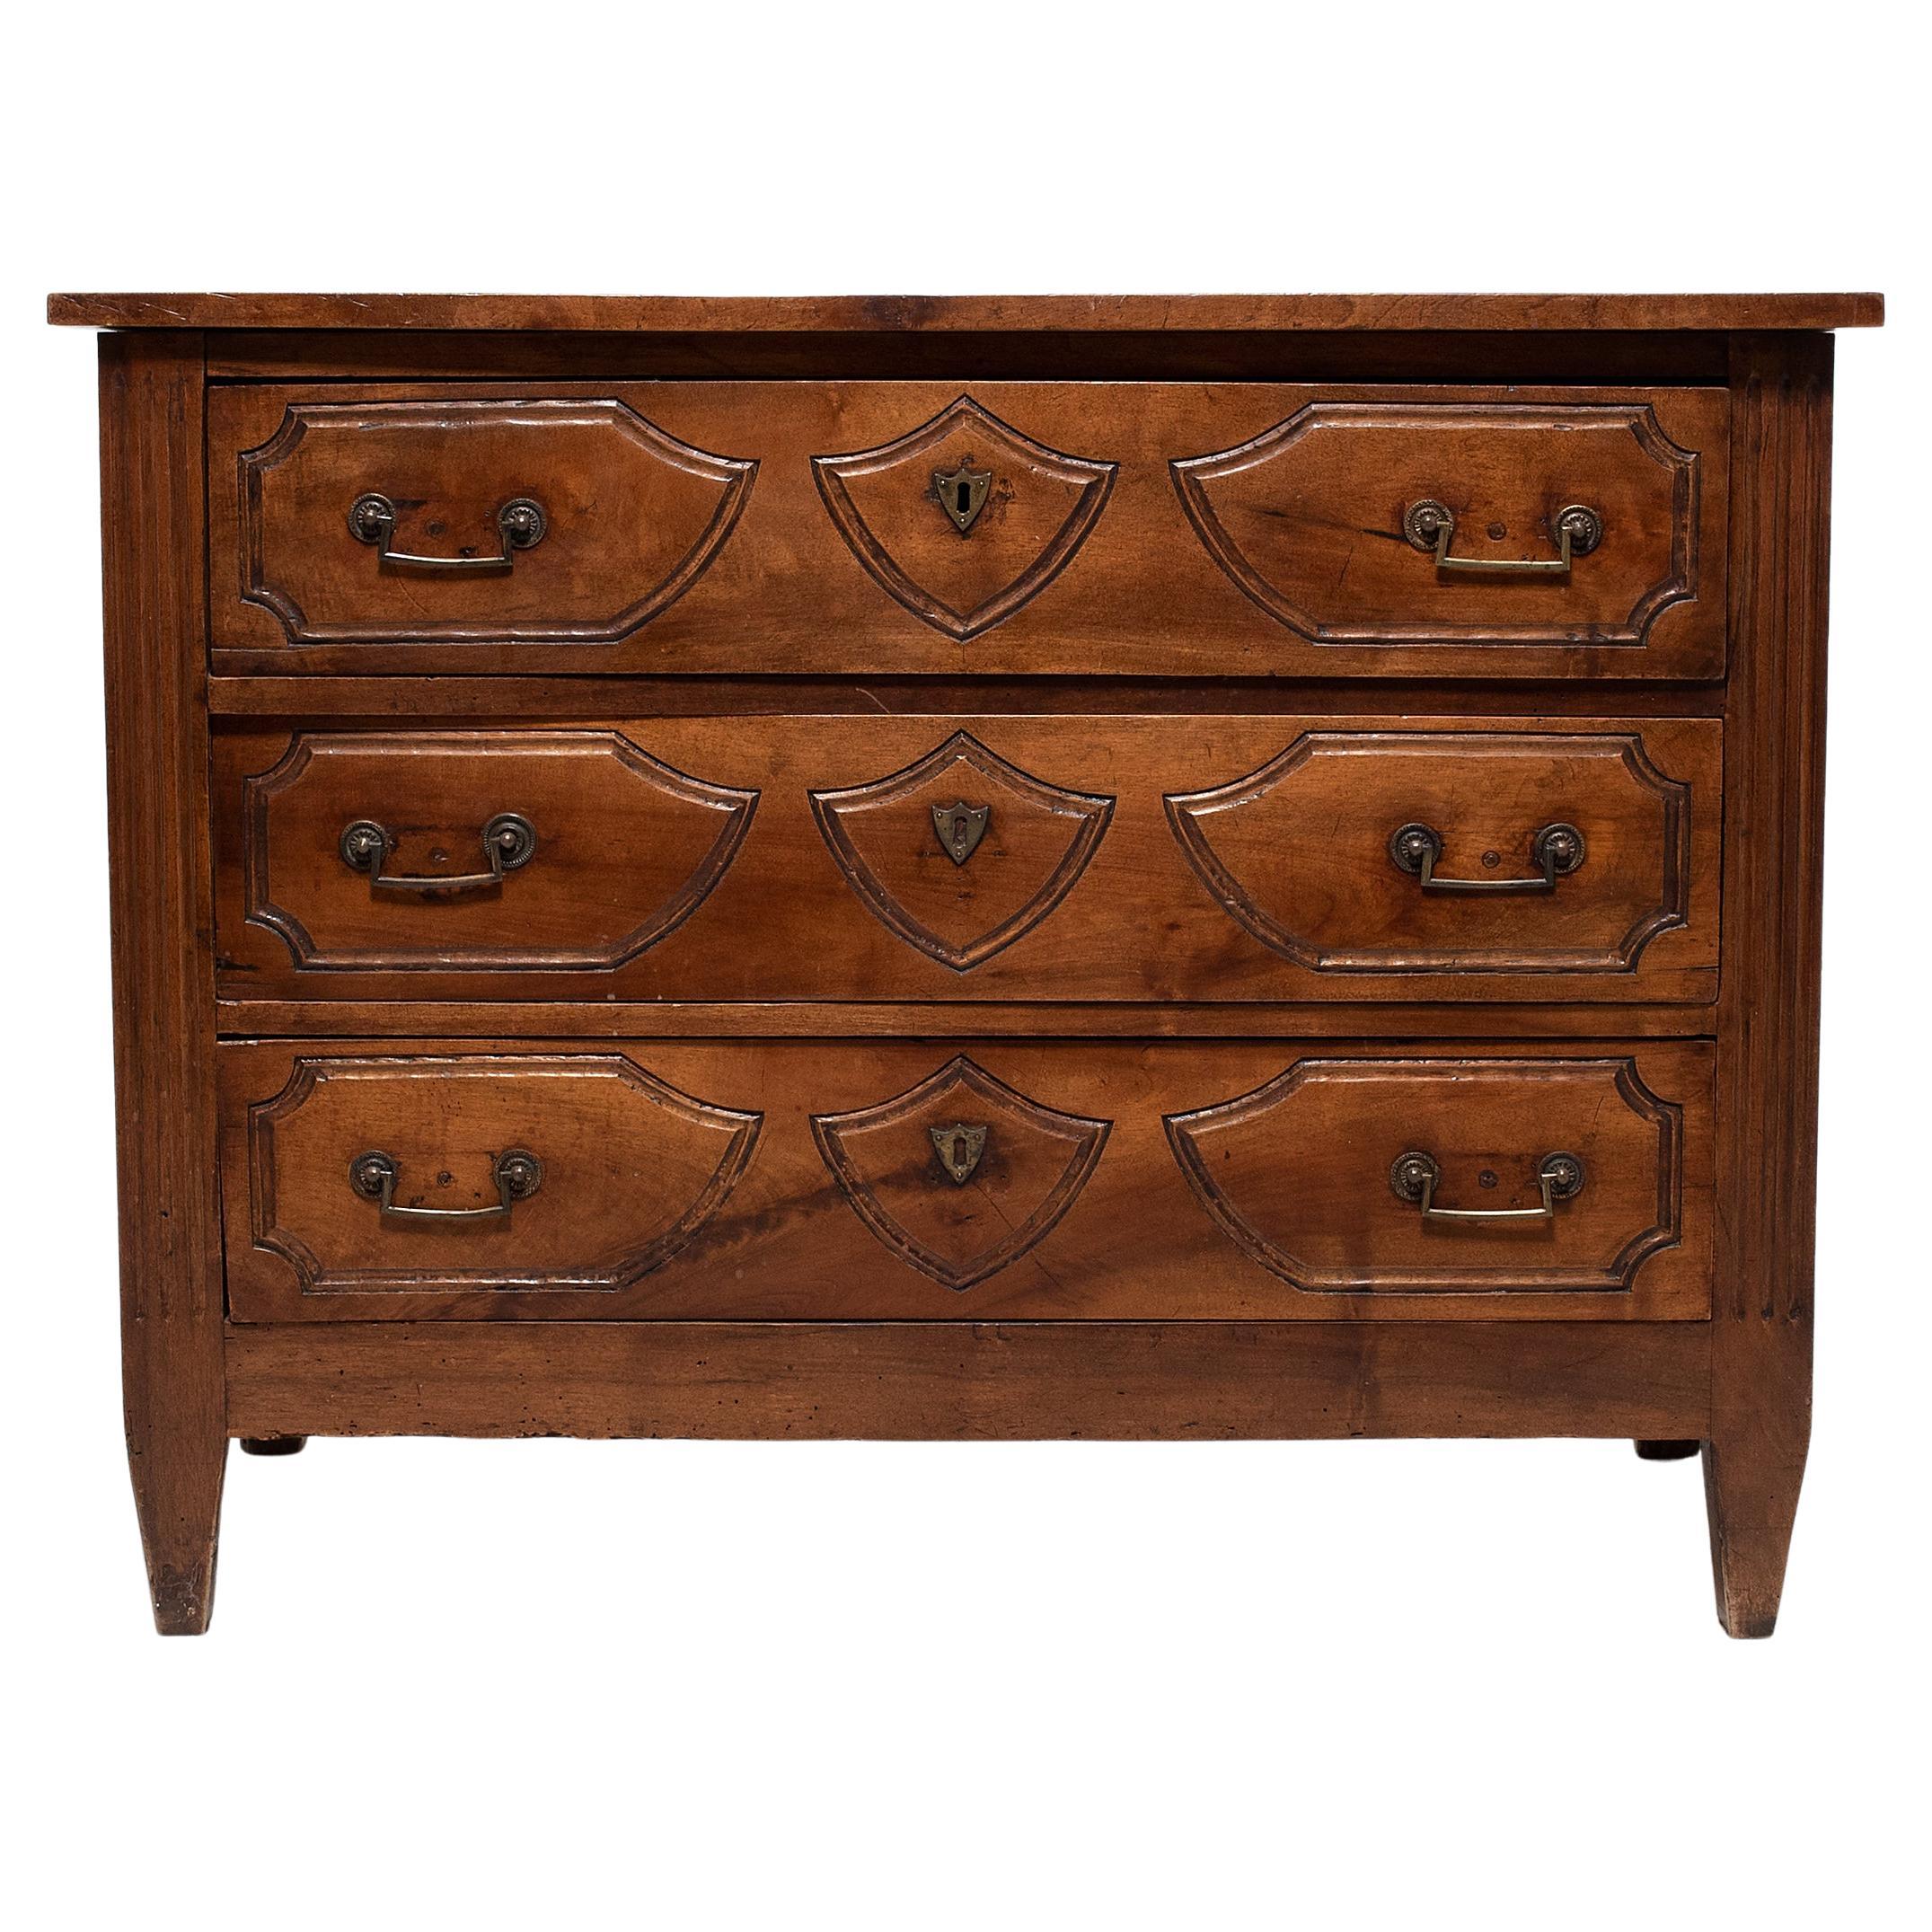 French Provincial Chest of Drawers, c. 1850